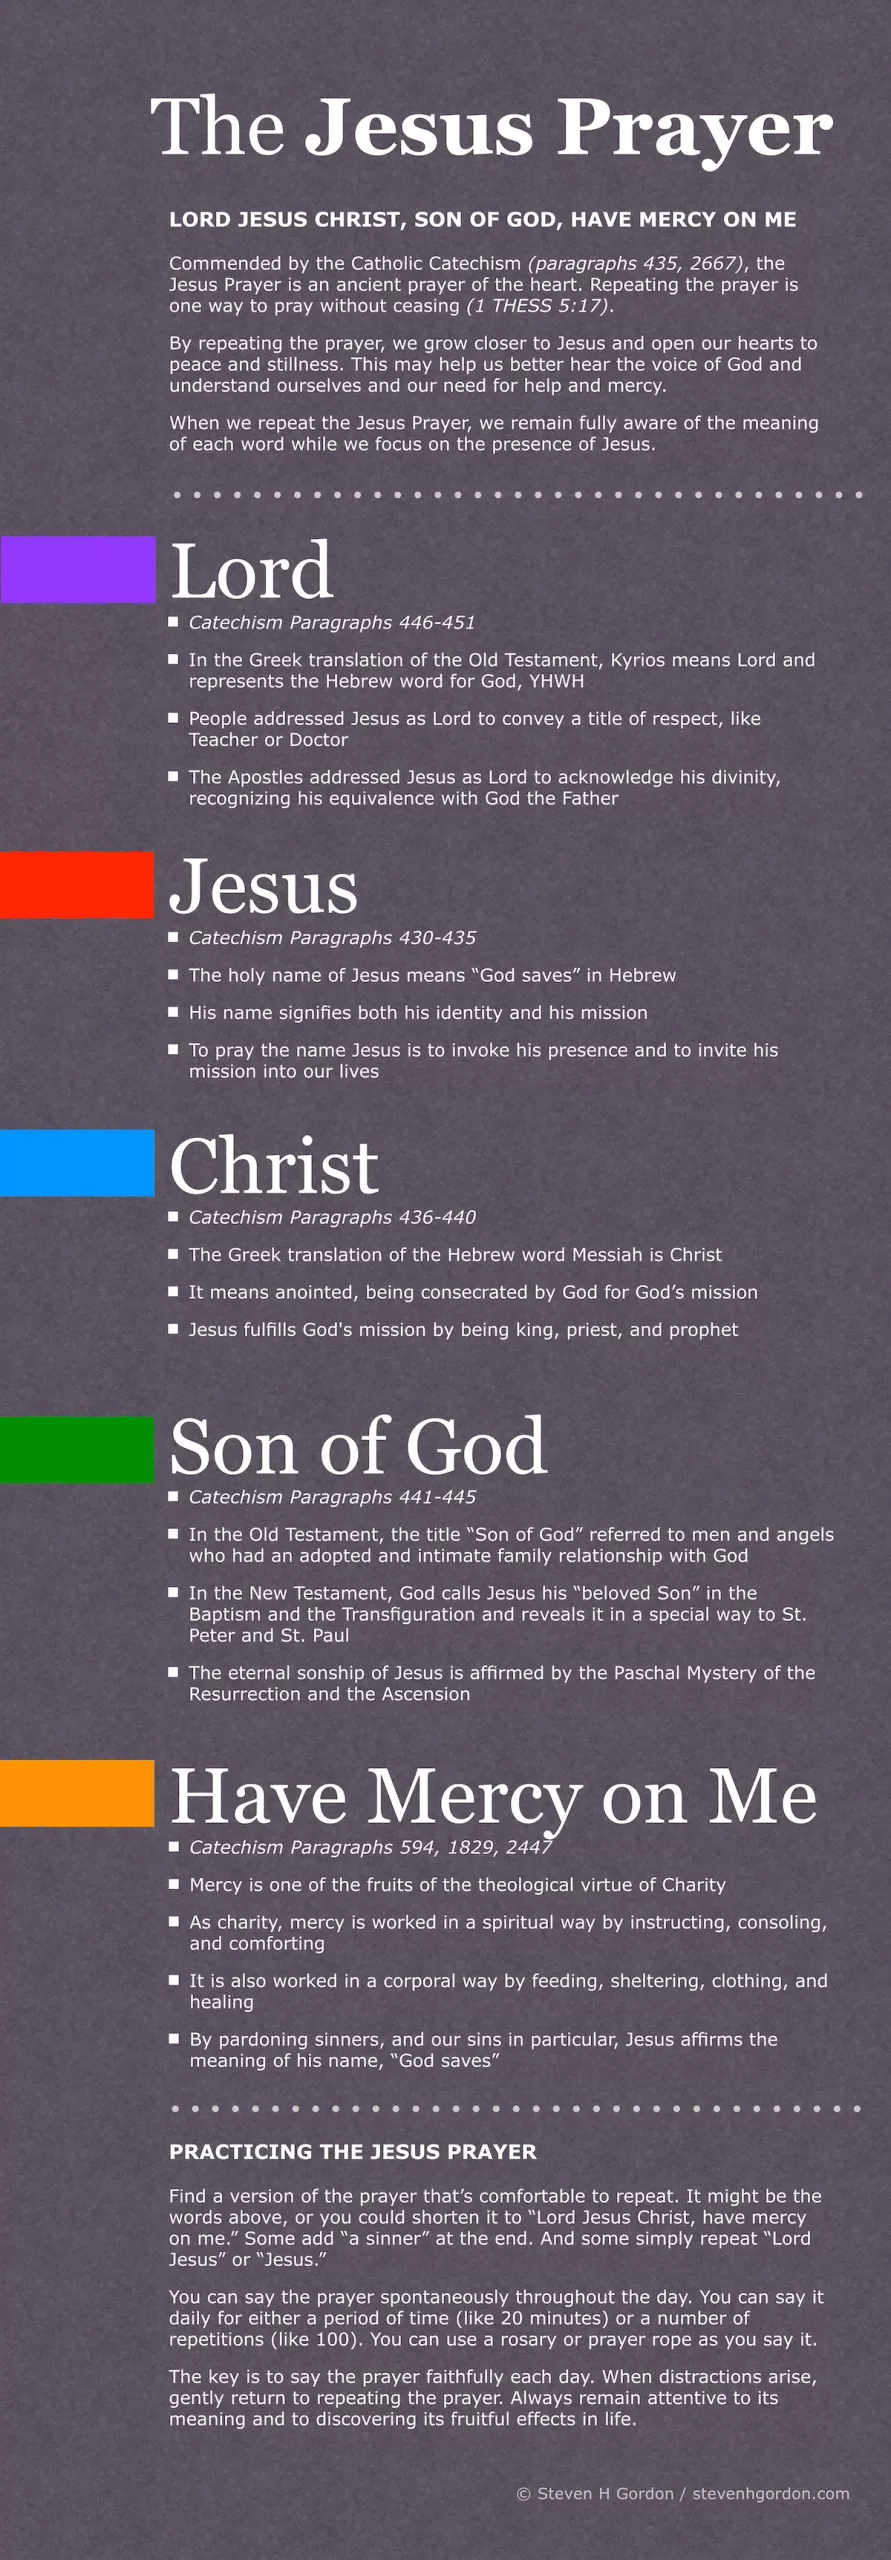 Infographic showing the phrases of the Jesus Prayer and explaining them using the Catholic Catechism.